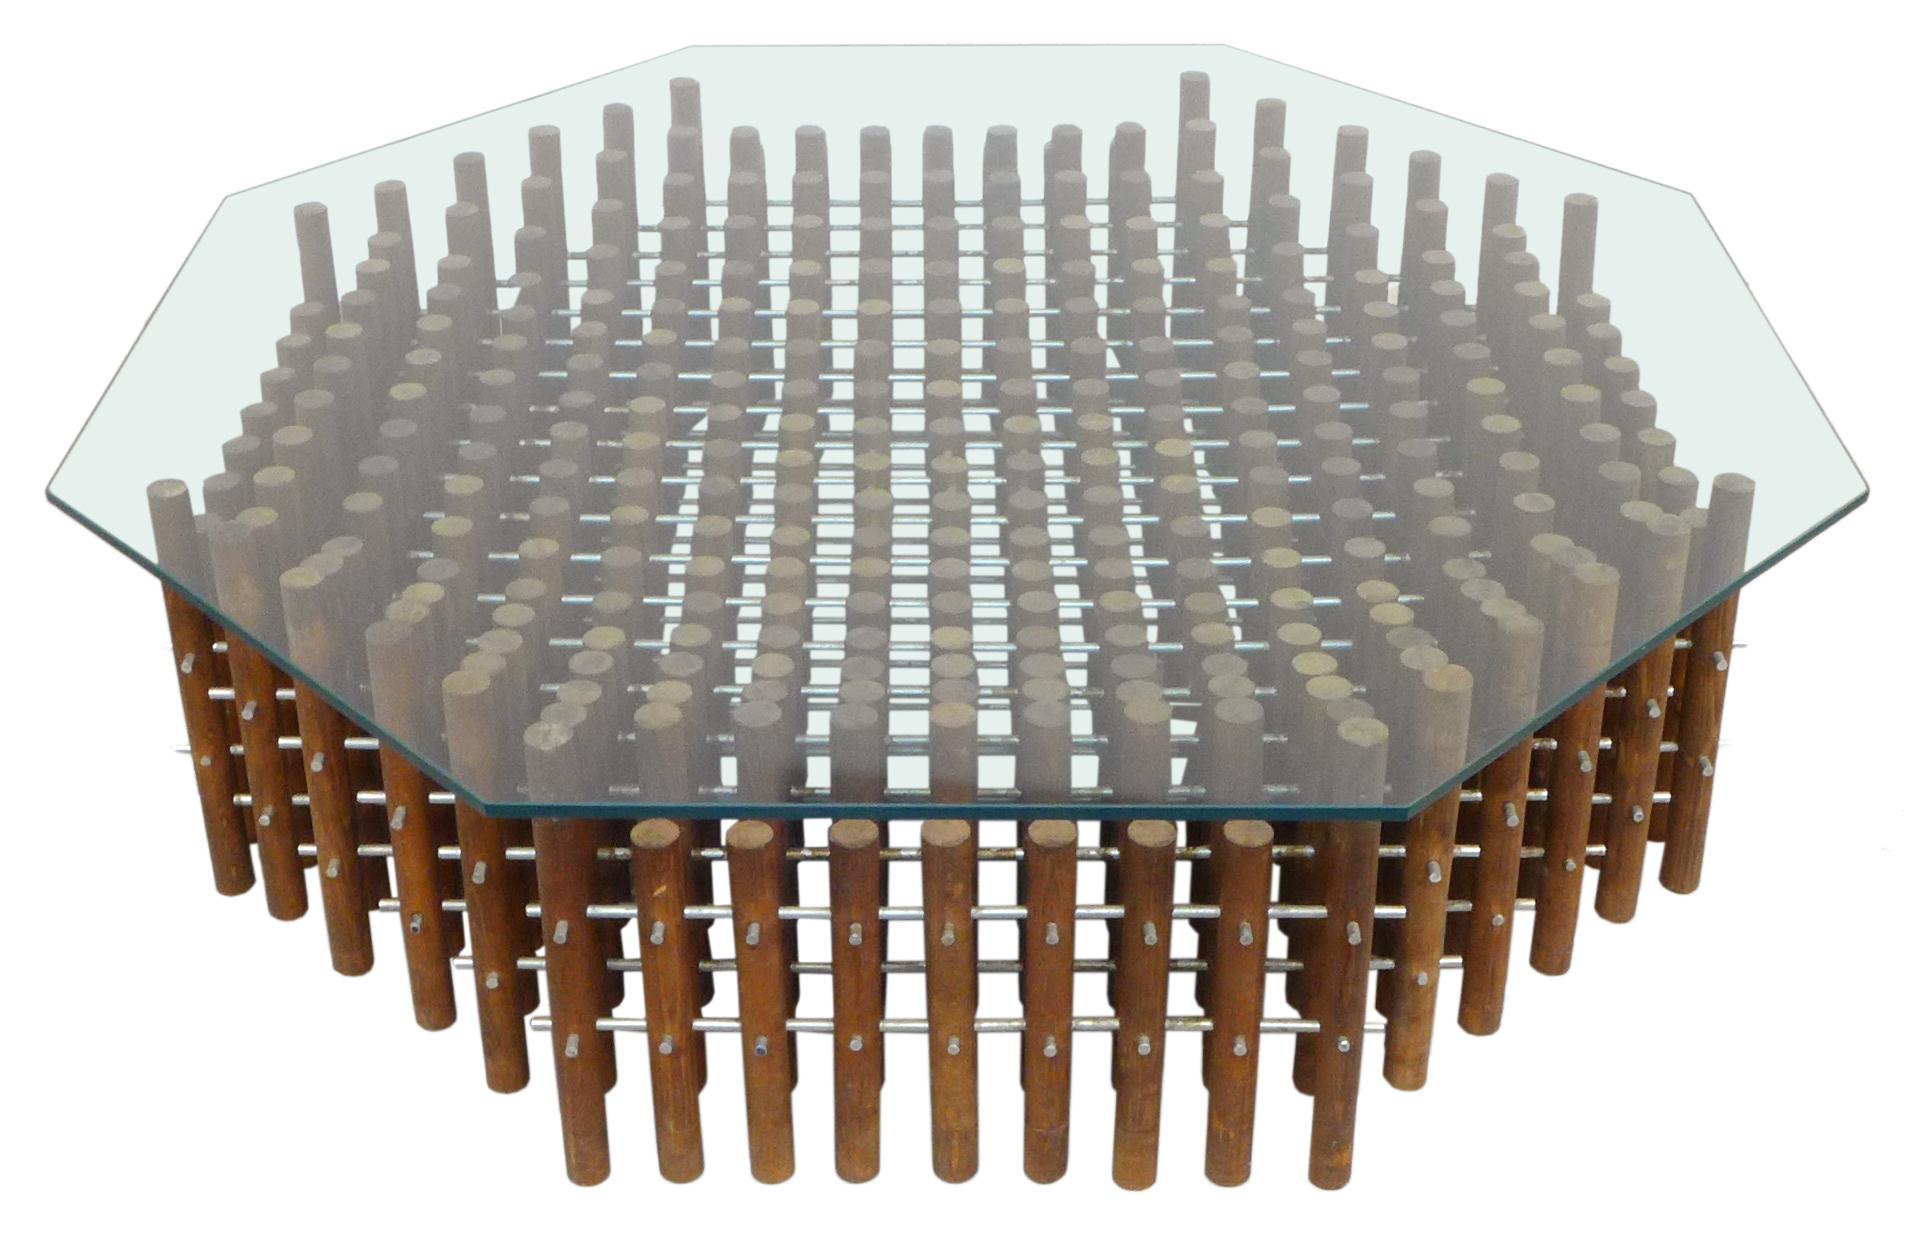 A fantastic aluminum, wood, and glass hexagonal coffee table. An unexpected and wonderfully, thoroughly constructed item; a large, hexagonal assemblage of dozens of undulating, vertical, 1